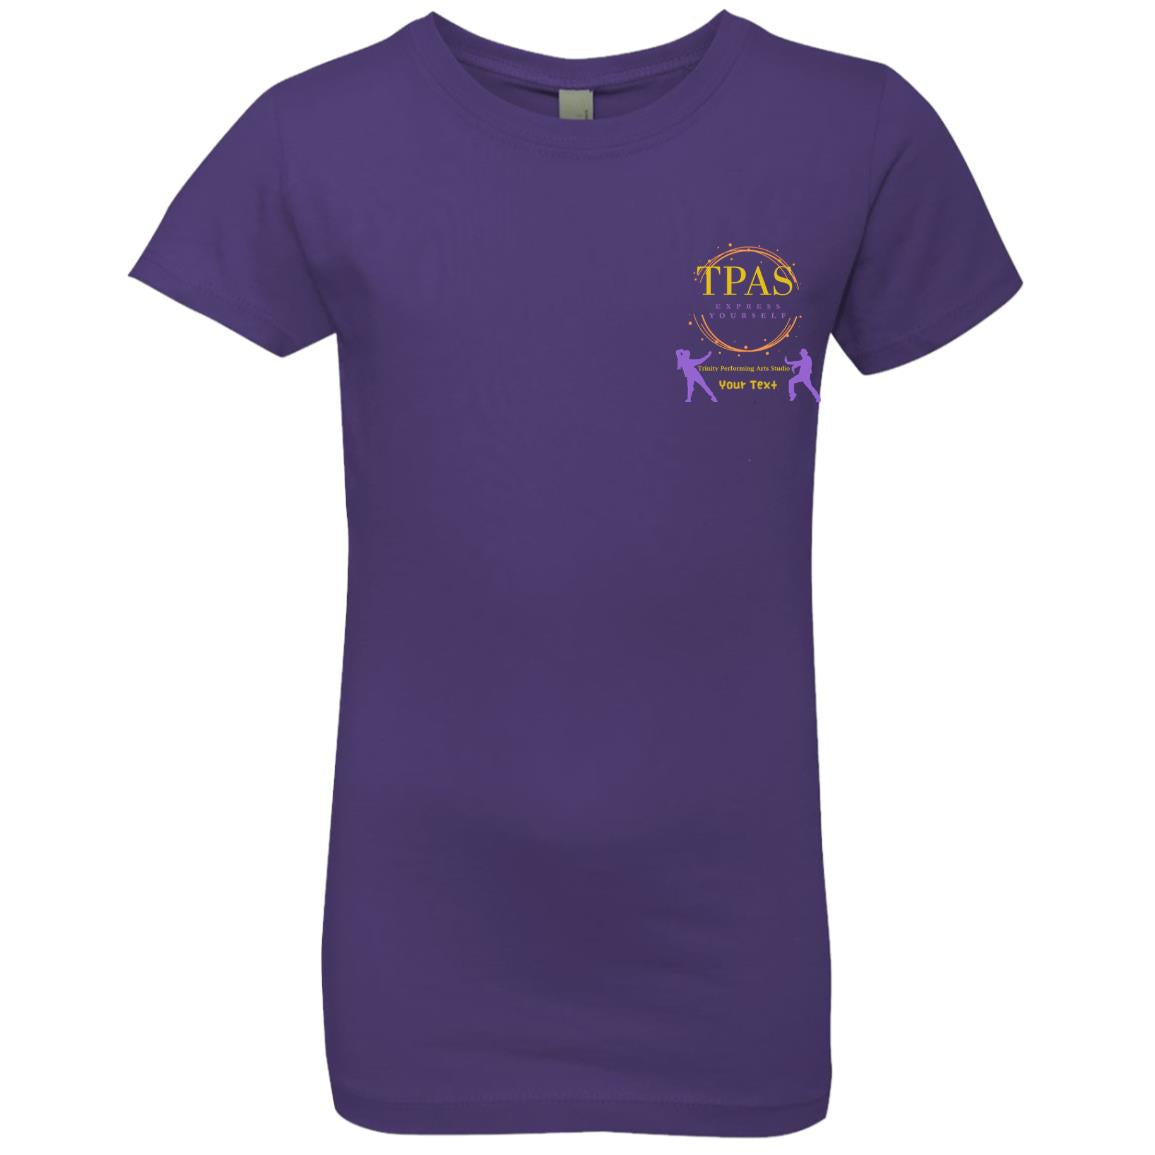 TPAS Competition Team Youth Girls' Princess T-Shirt